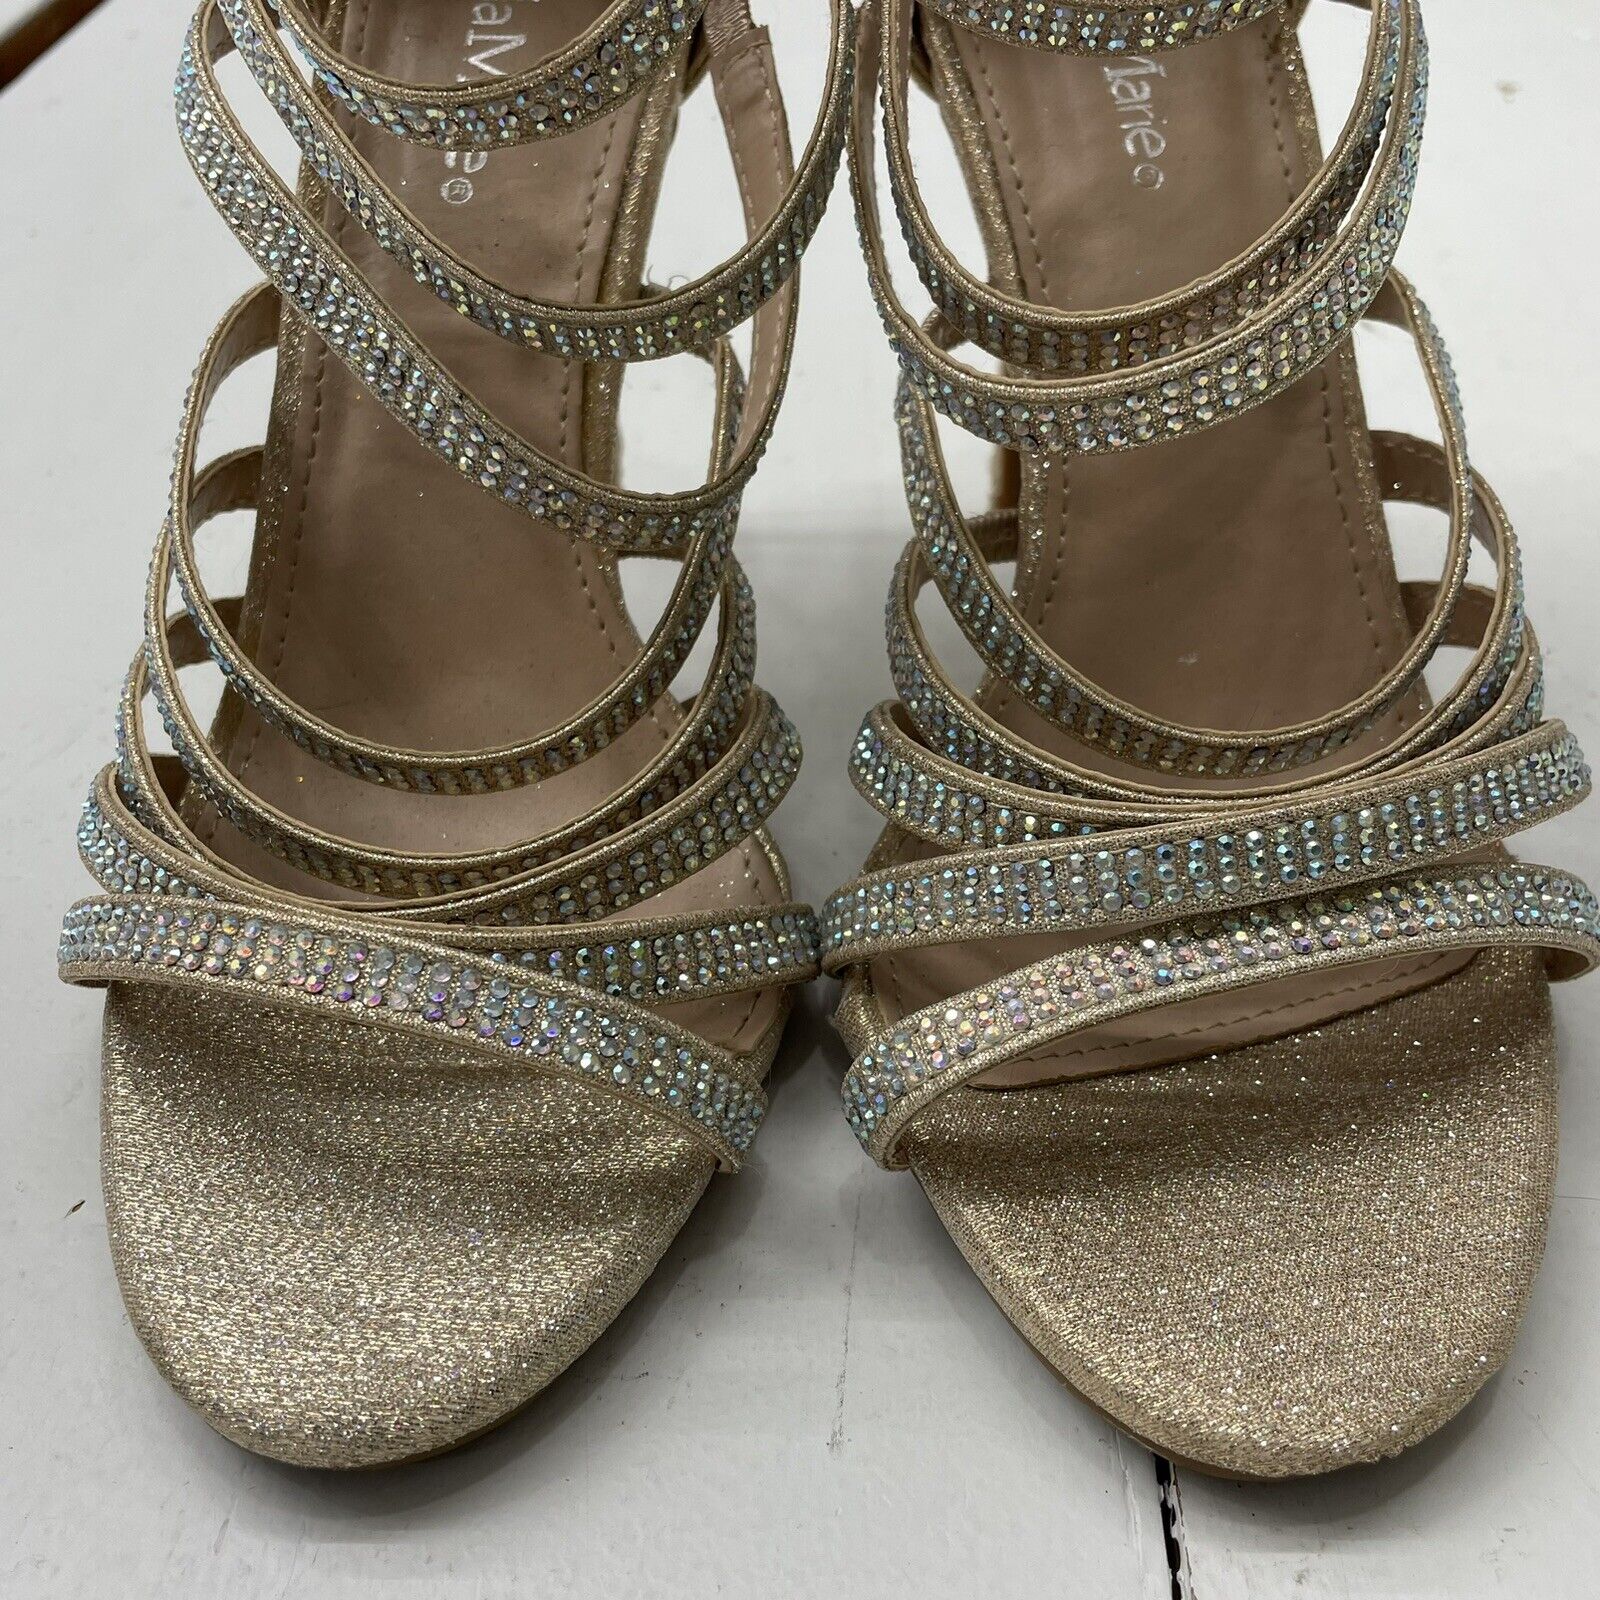 Glamorous barely there heeled sandals in gold glitter | ASOS